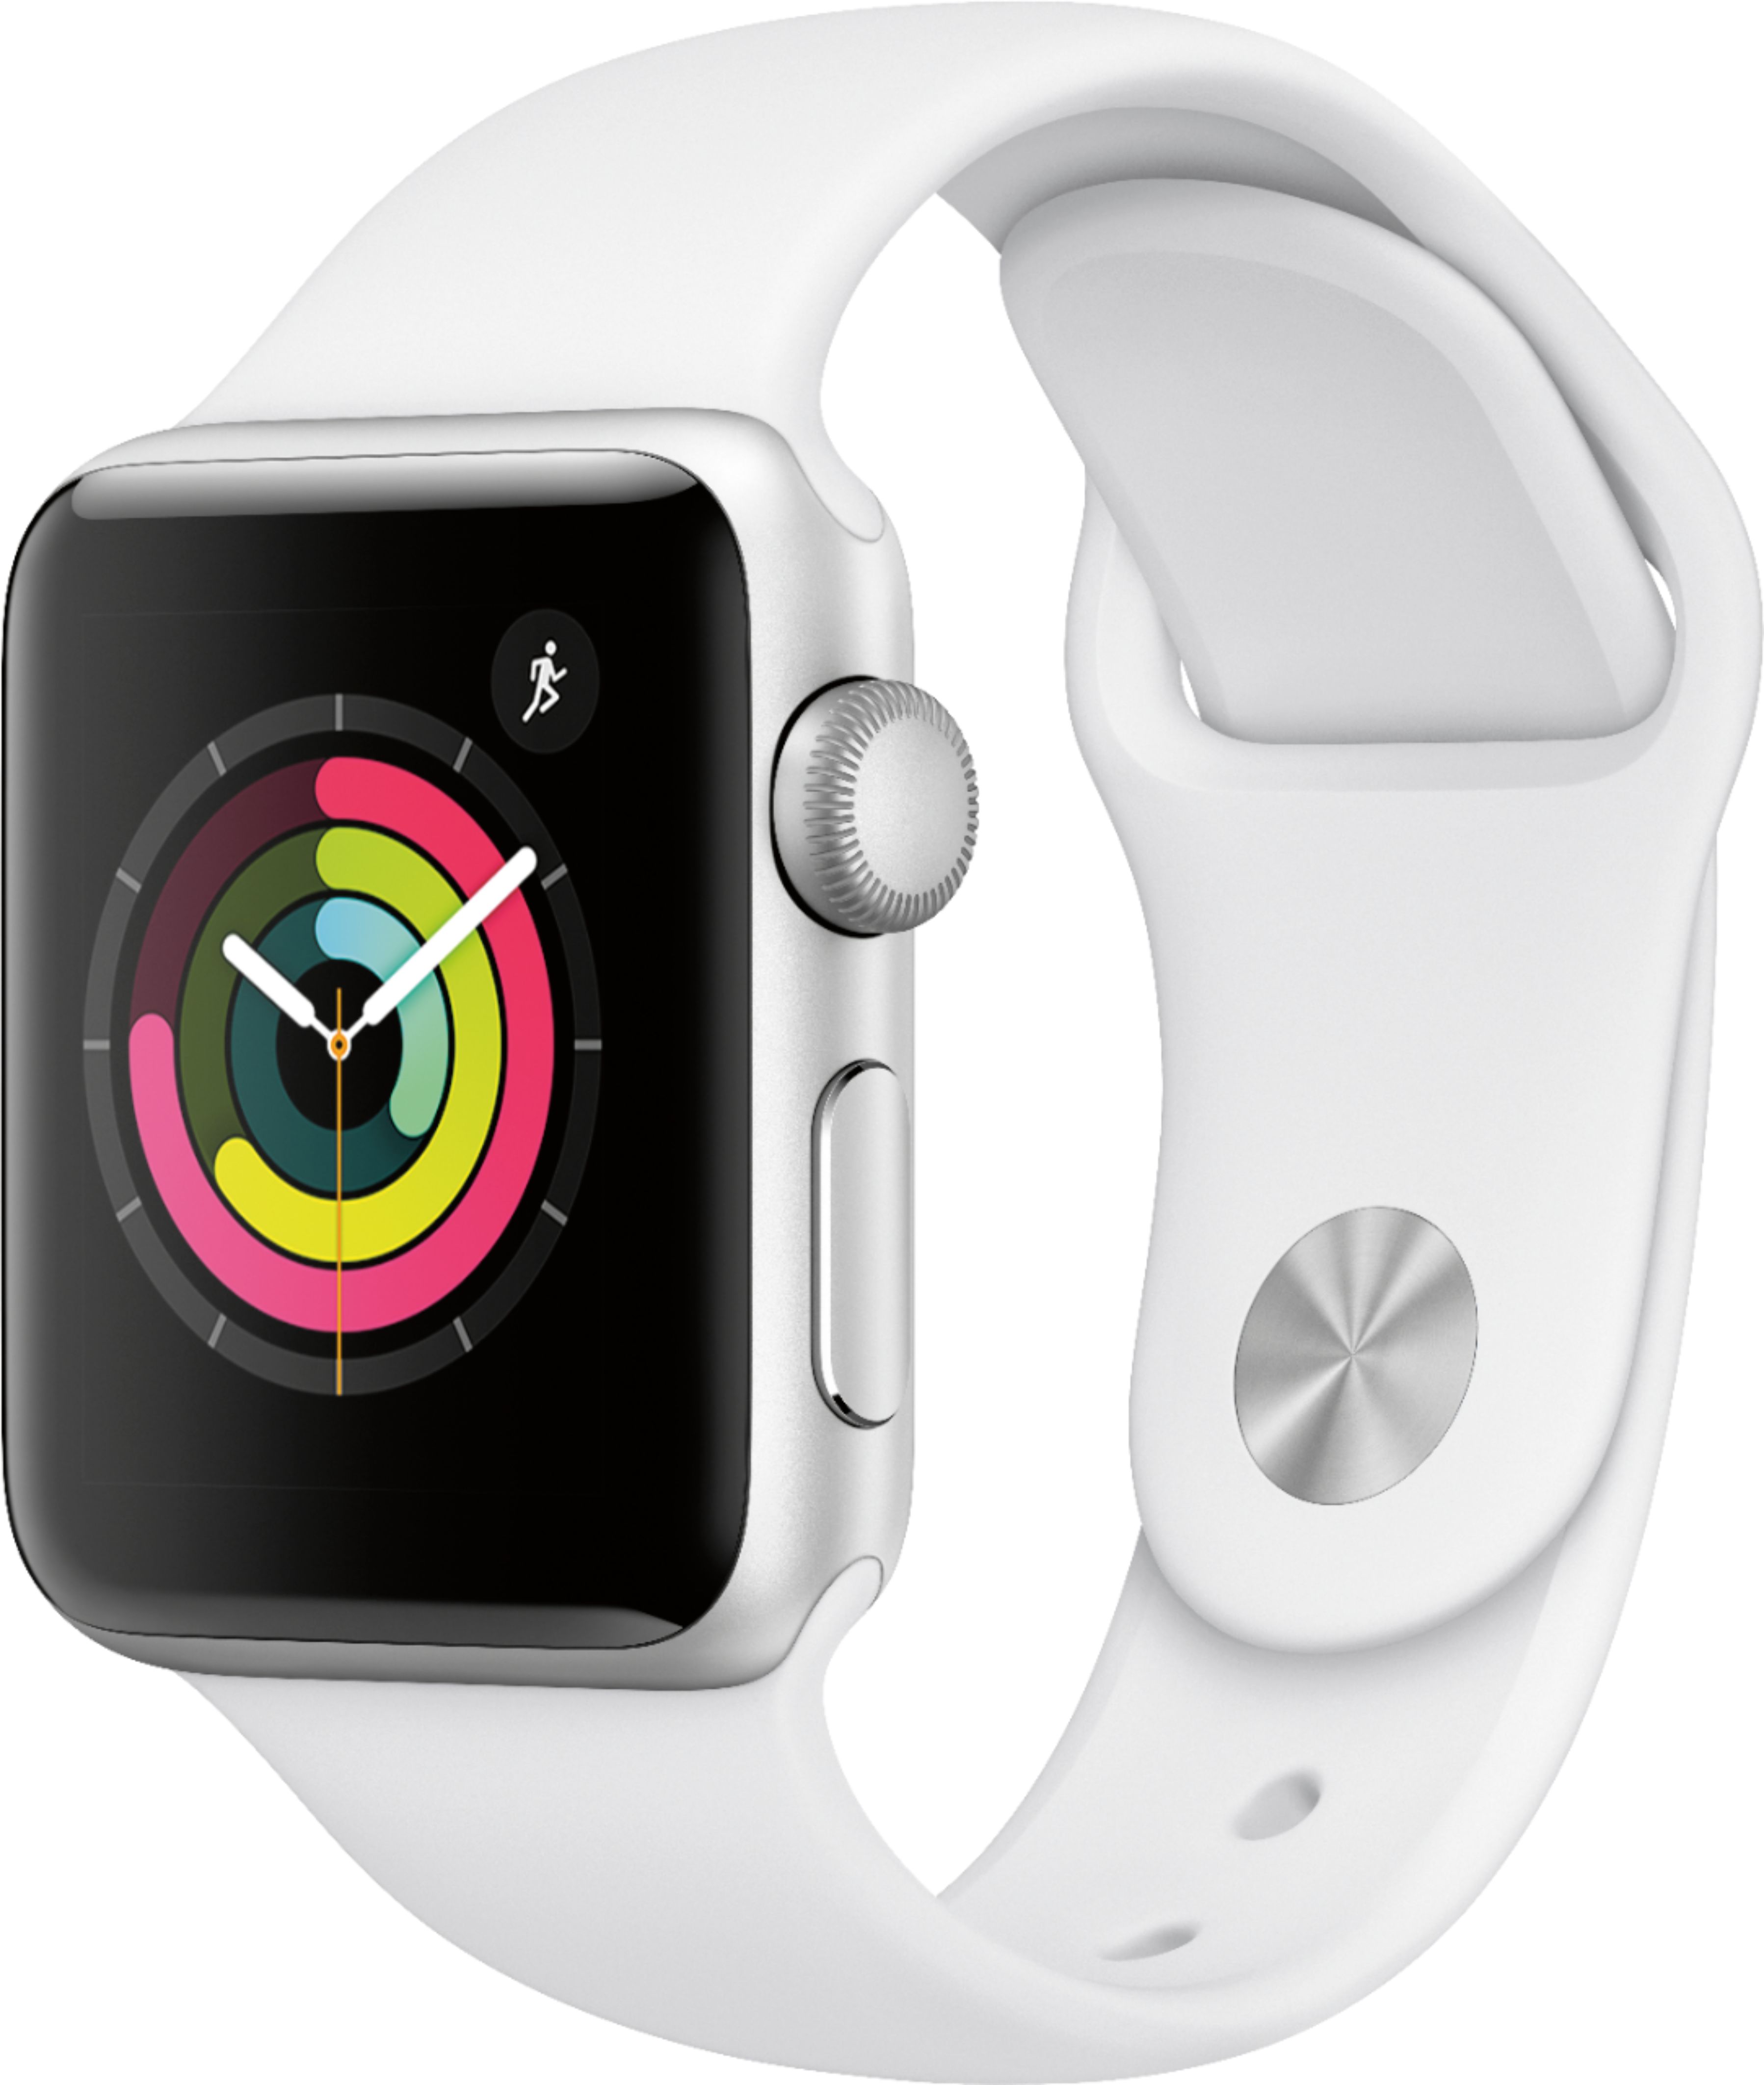 PC/タブレット PC周辺機器 Apple Watch Series 3 (GPS) 38mm Aluminum Case with  - Best Buy